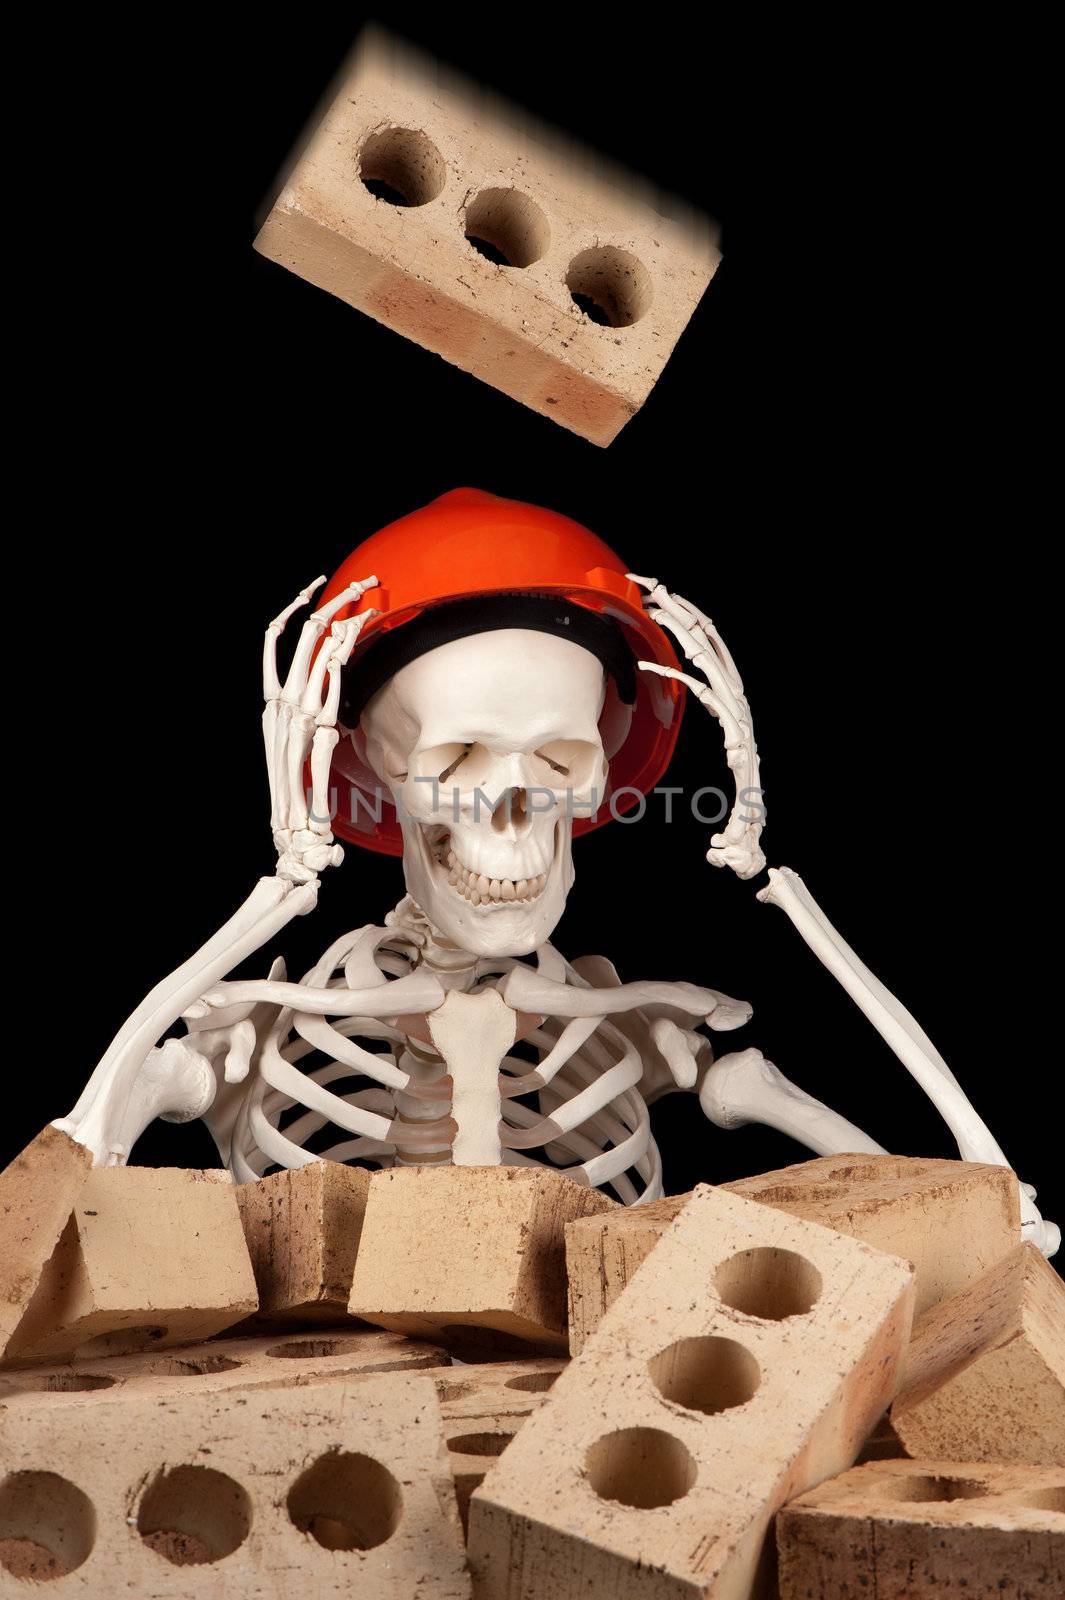 A falling brick is about to make contact with a hard hat on the skull of a skeleton.